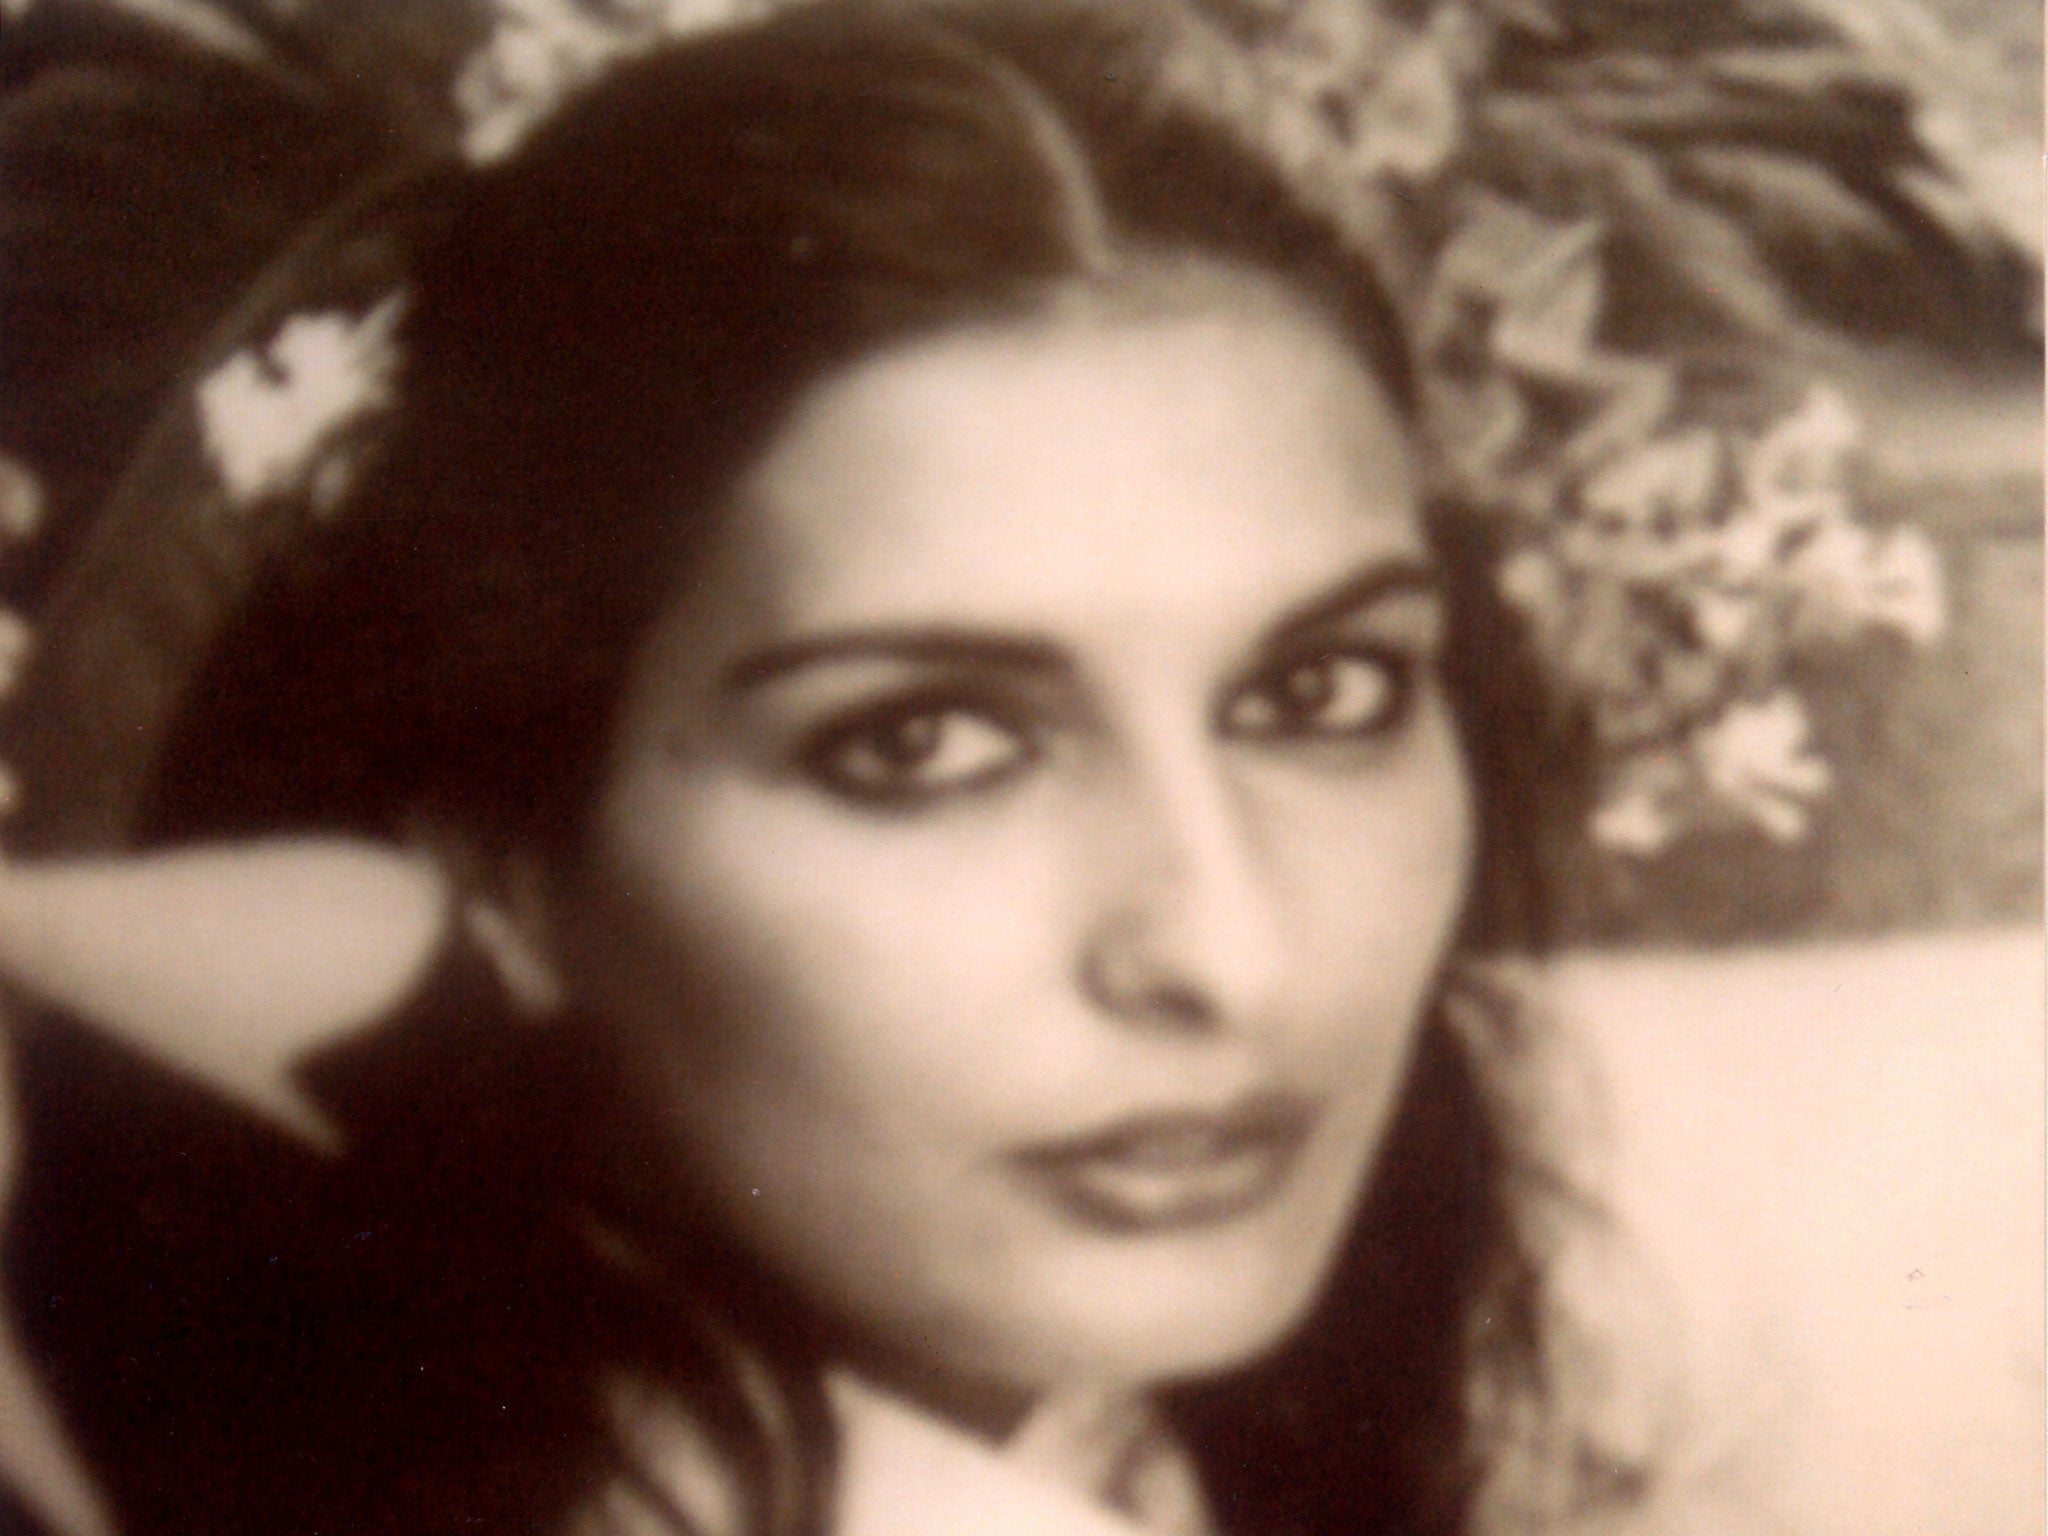 Janan Harb, pictured at 19 – an alleged wife of the late King Fahd of Saudi Arabia